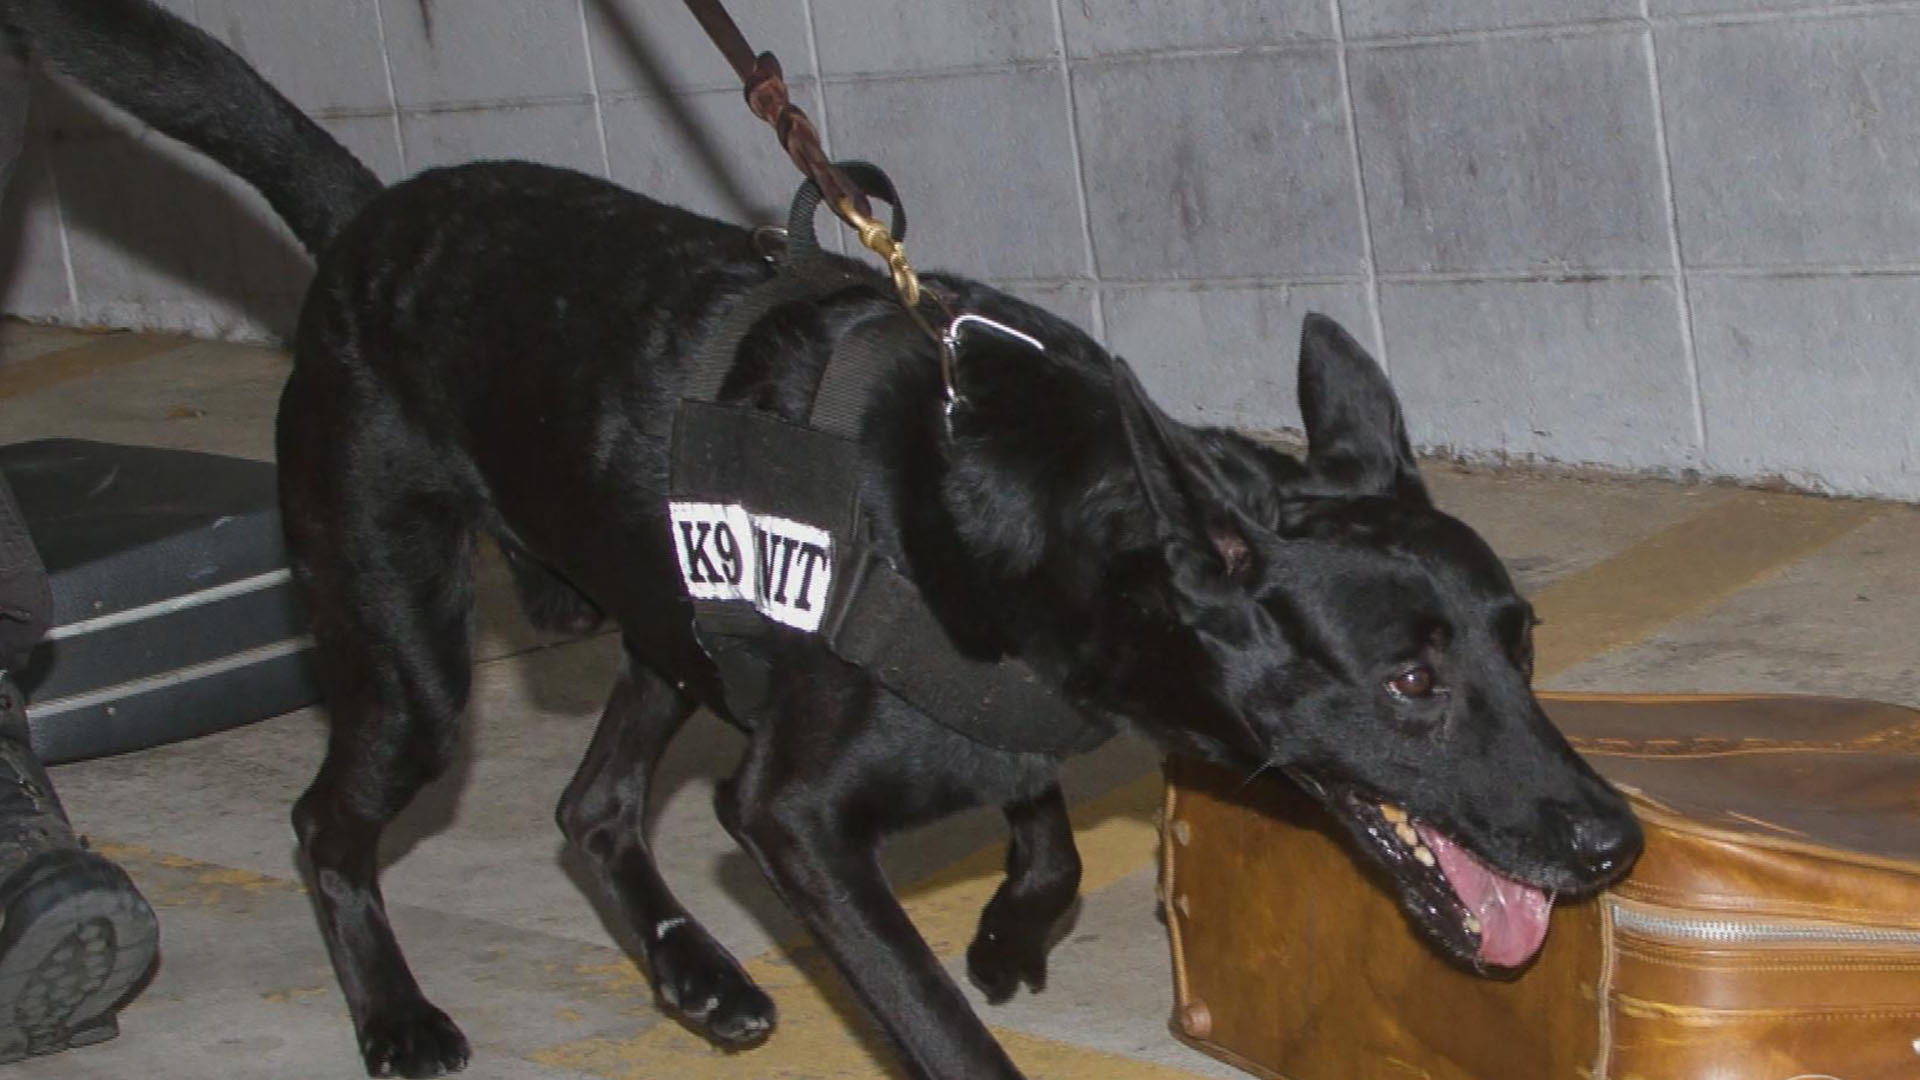 Watch CBS Evening News: Officers honor hero K-9 recovering from shooting -  Full show on CBS